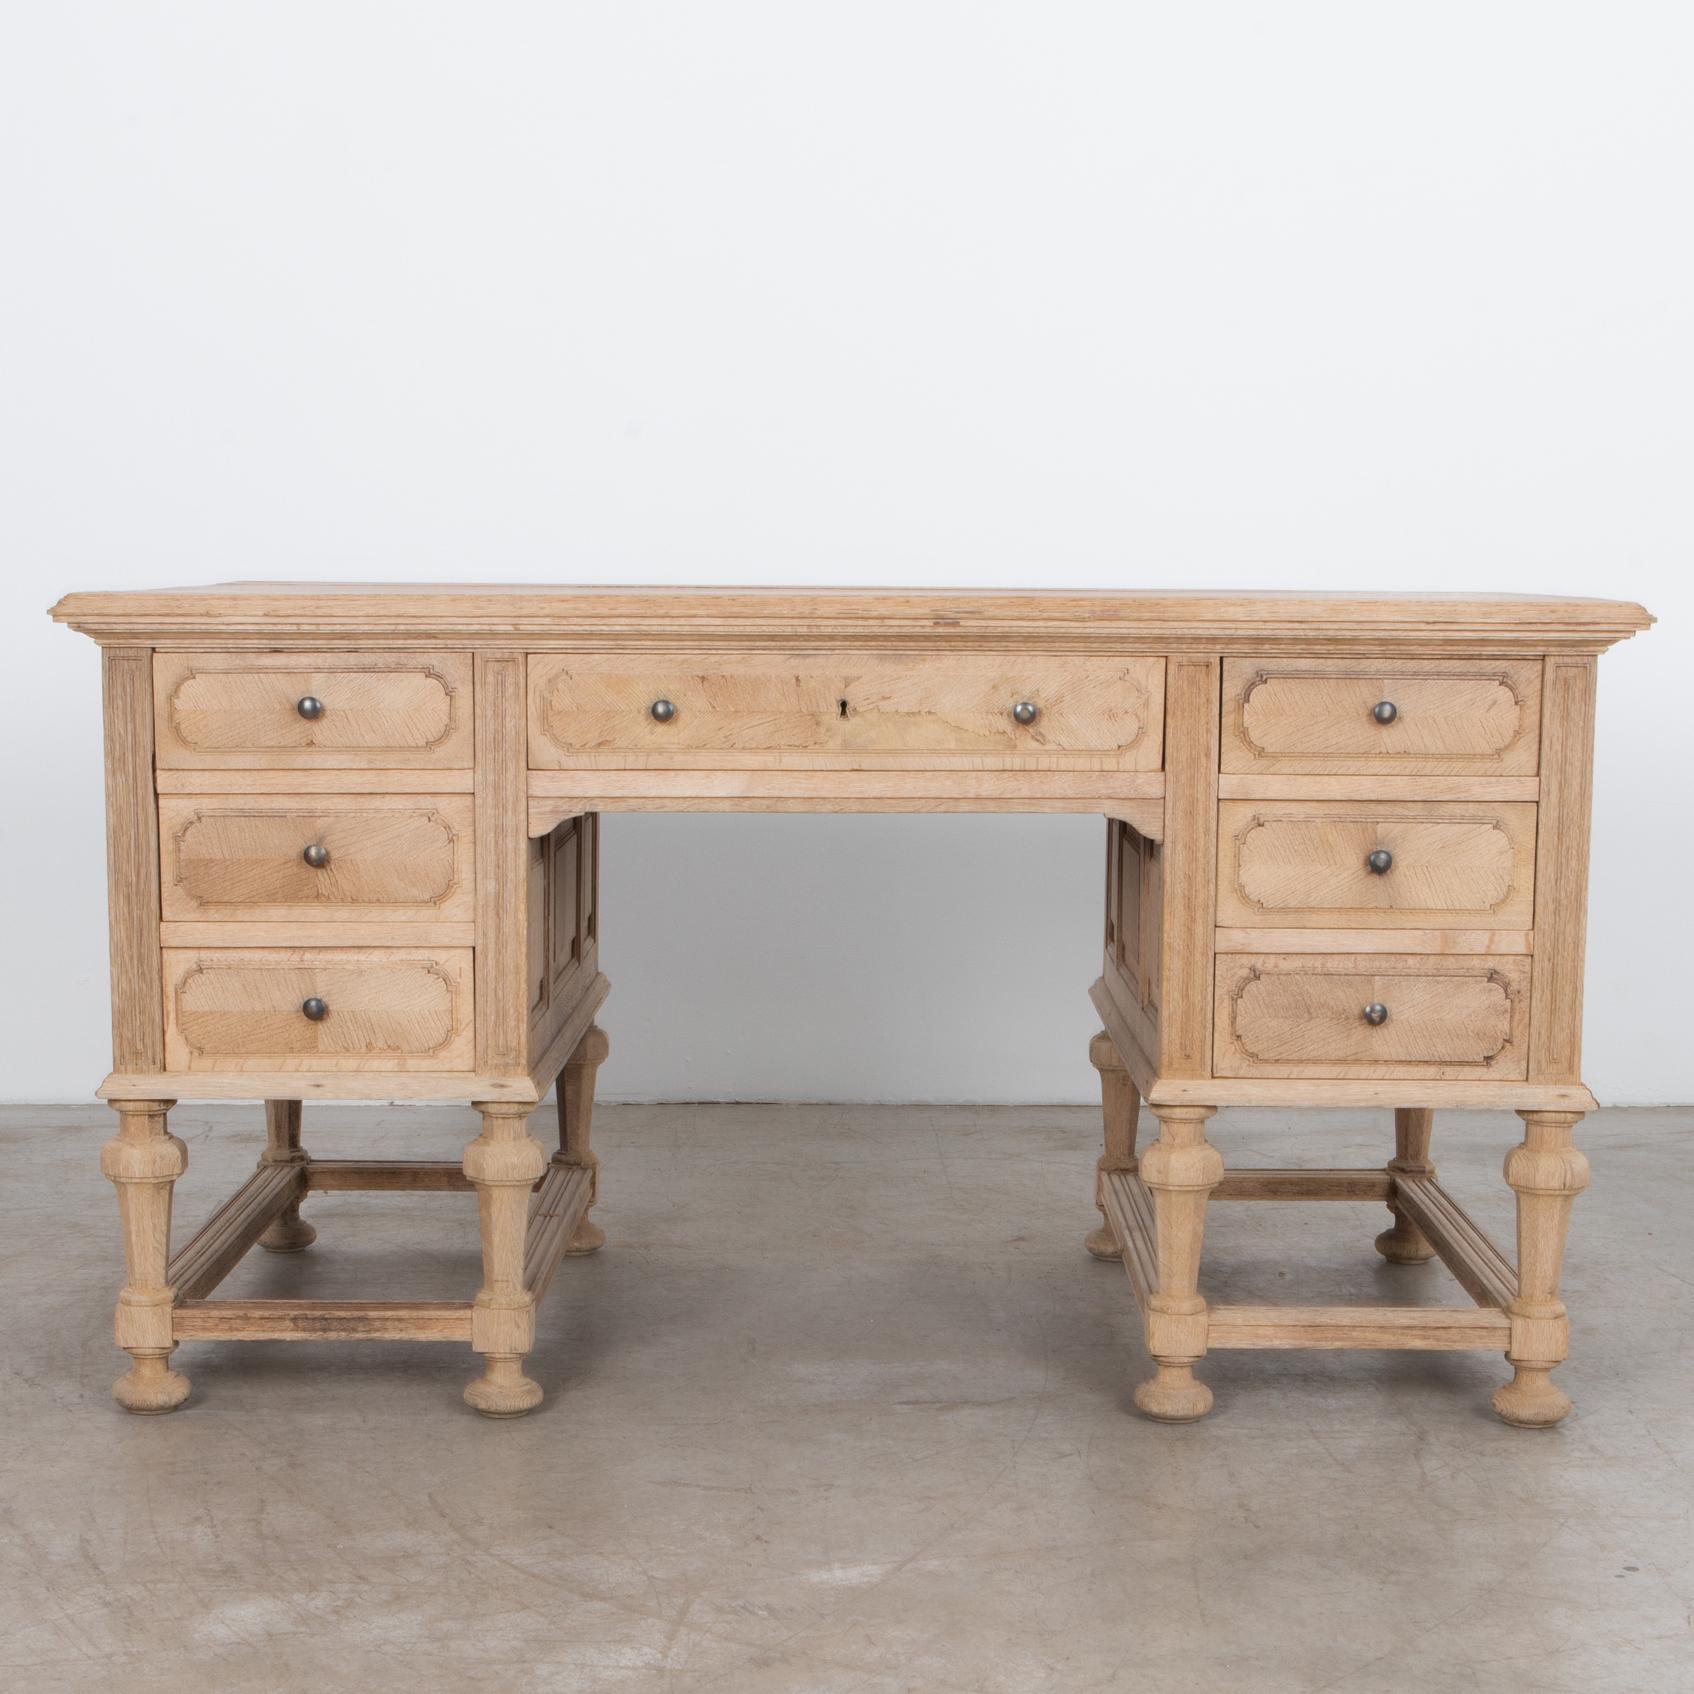 From circa 1940, this desk features plenty of drawer storage, an elegant
traditional construction with natural wood top, resting on stable carved legs. An
oil finish highlights the aesthetic qualities of the oak, and the charming